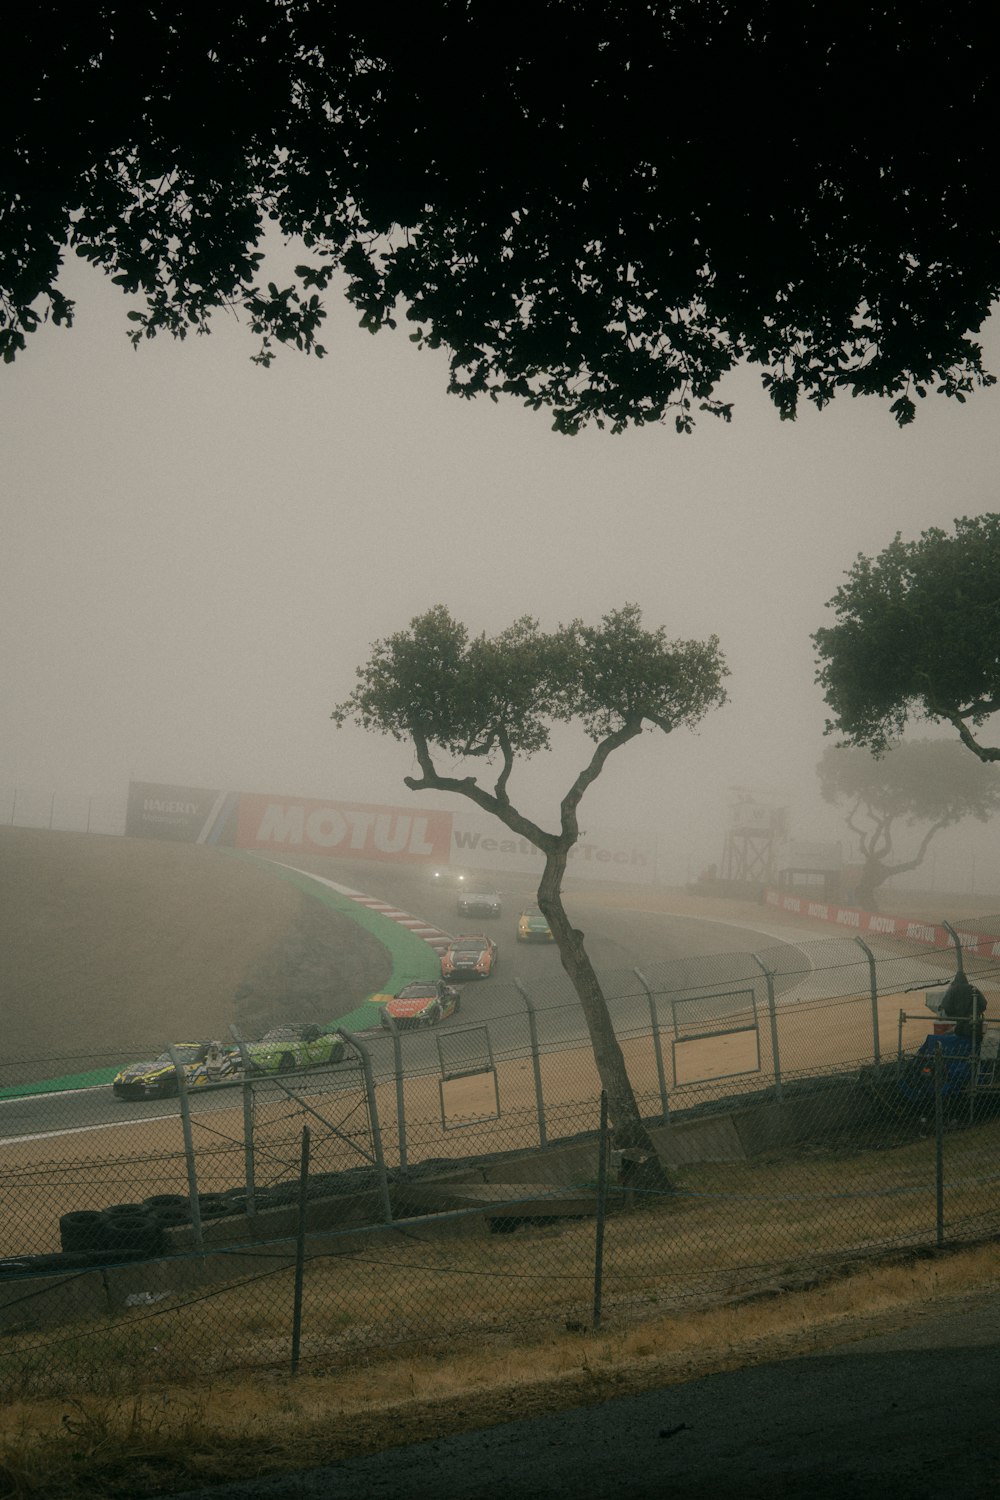 a foggy race track with cars driving on it